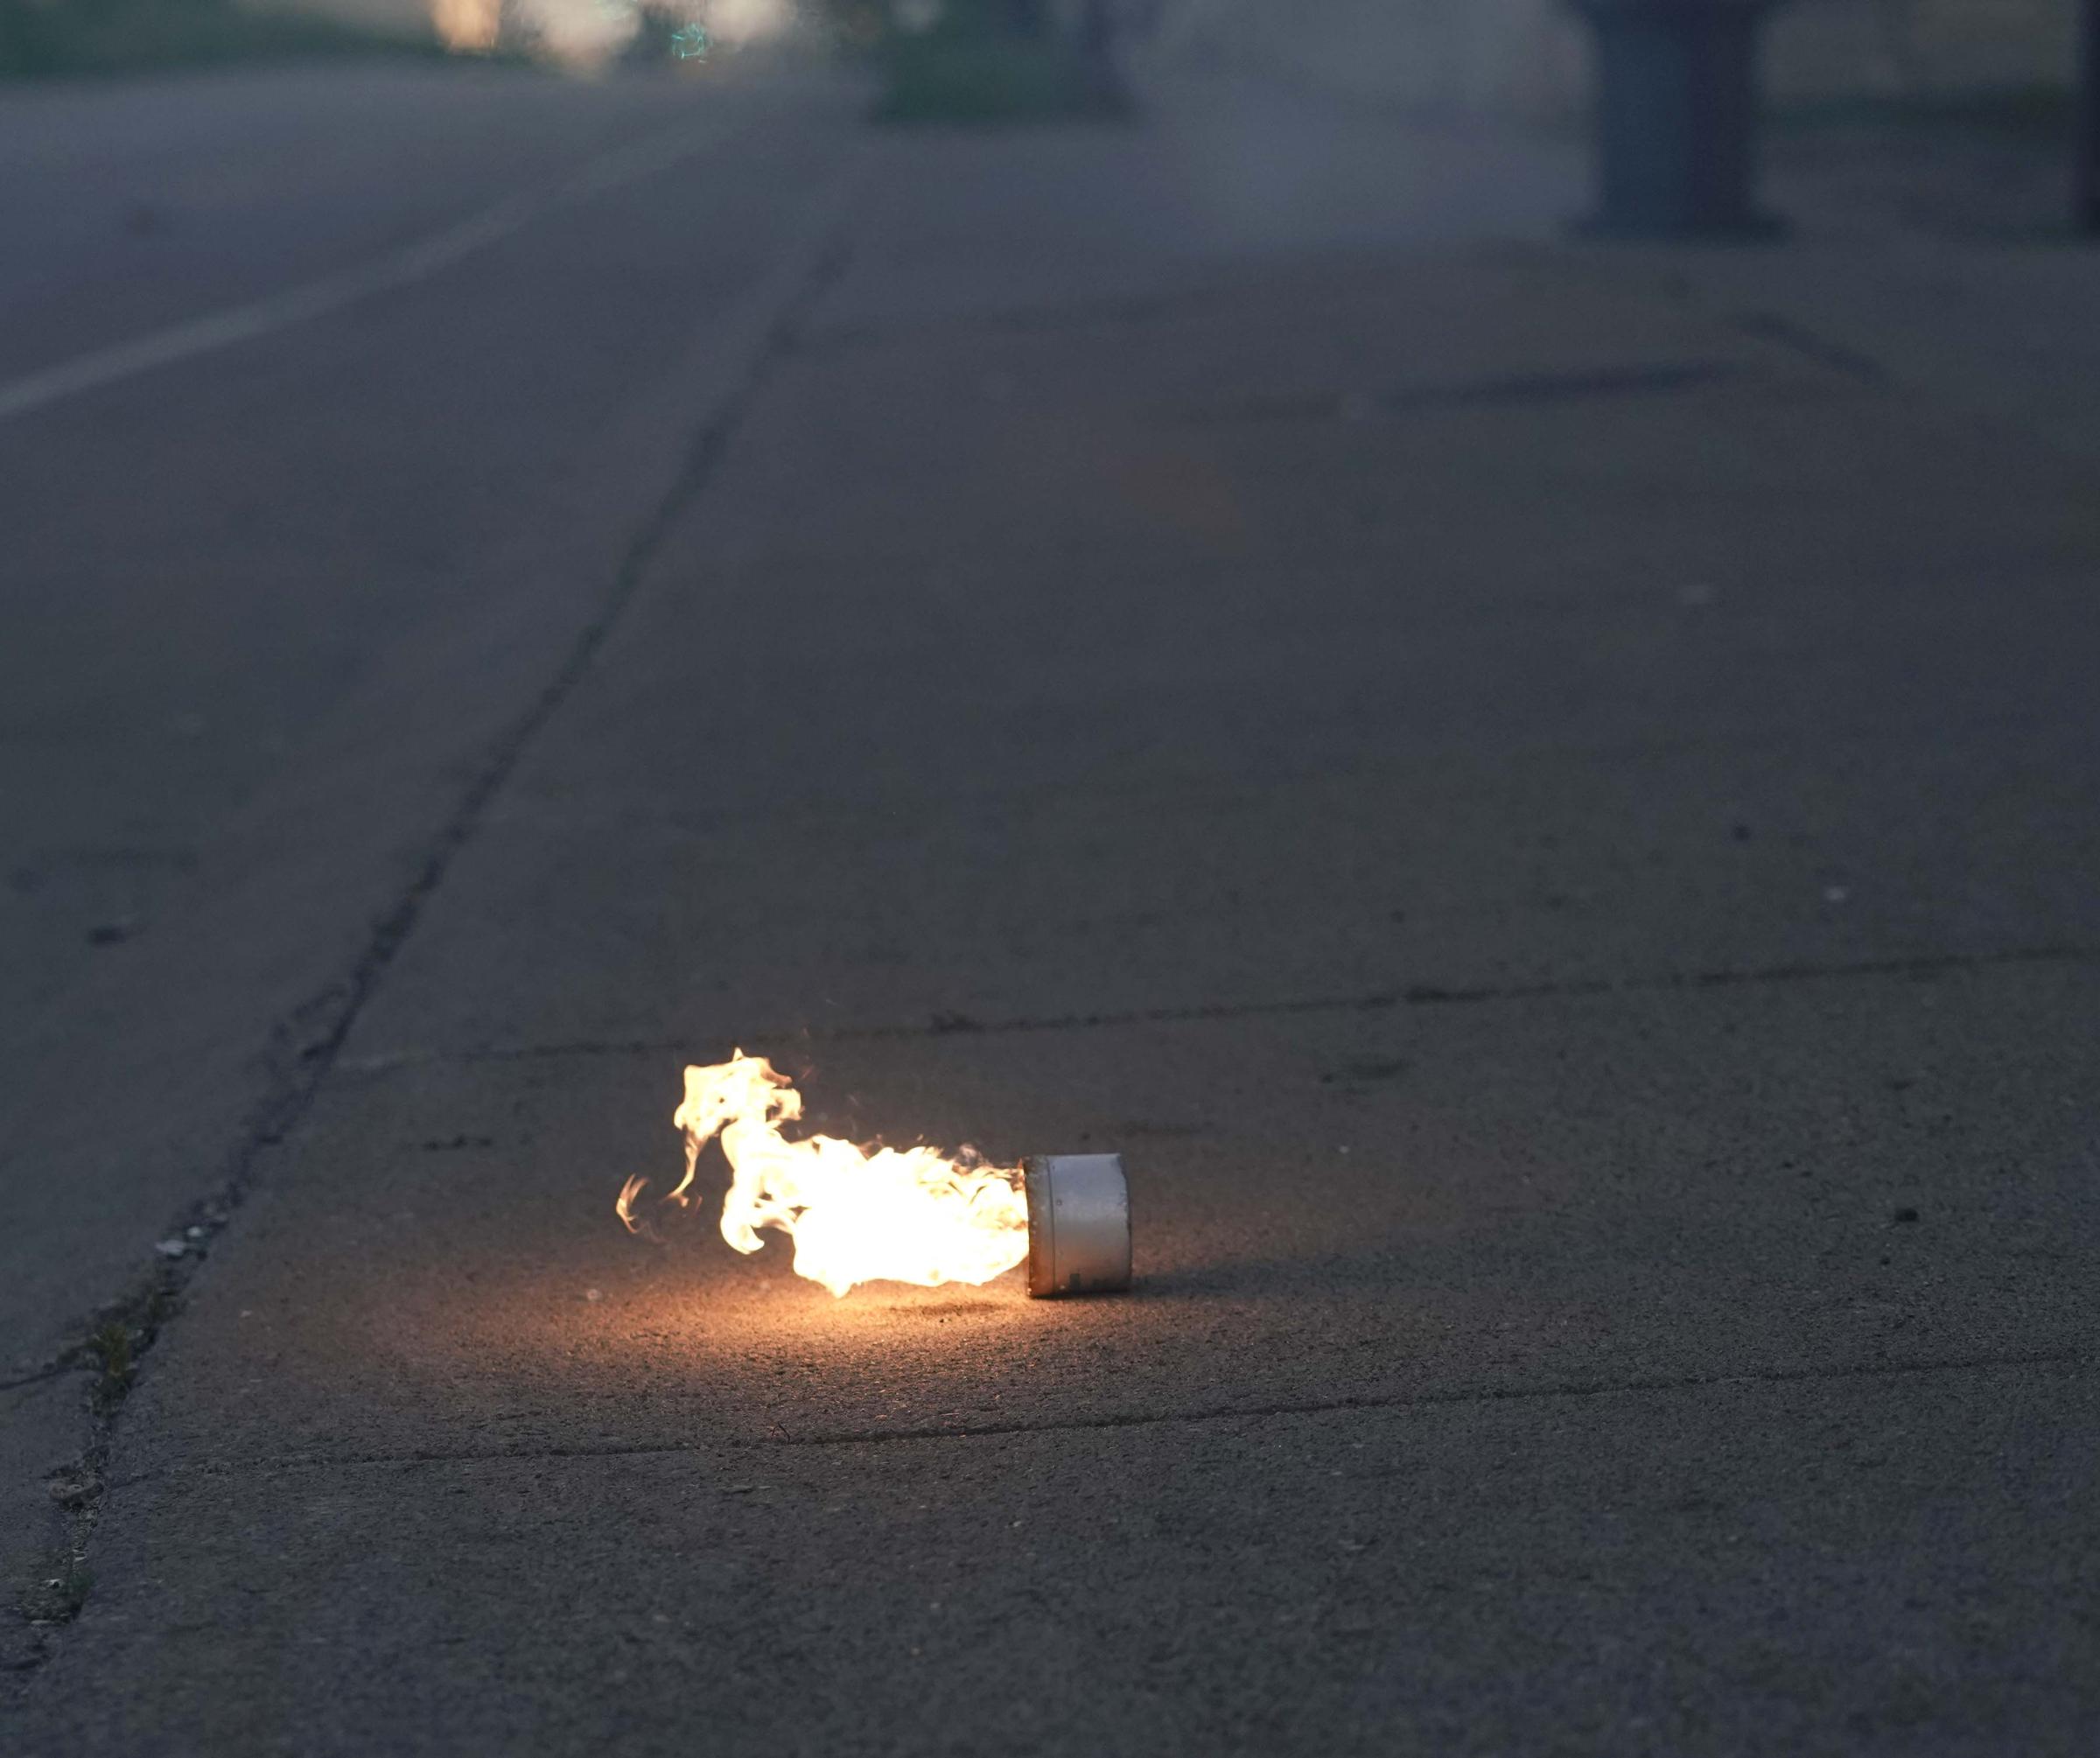 The BLM Summer - A tear gas canister expends on a sidewalk on Friday, May...